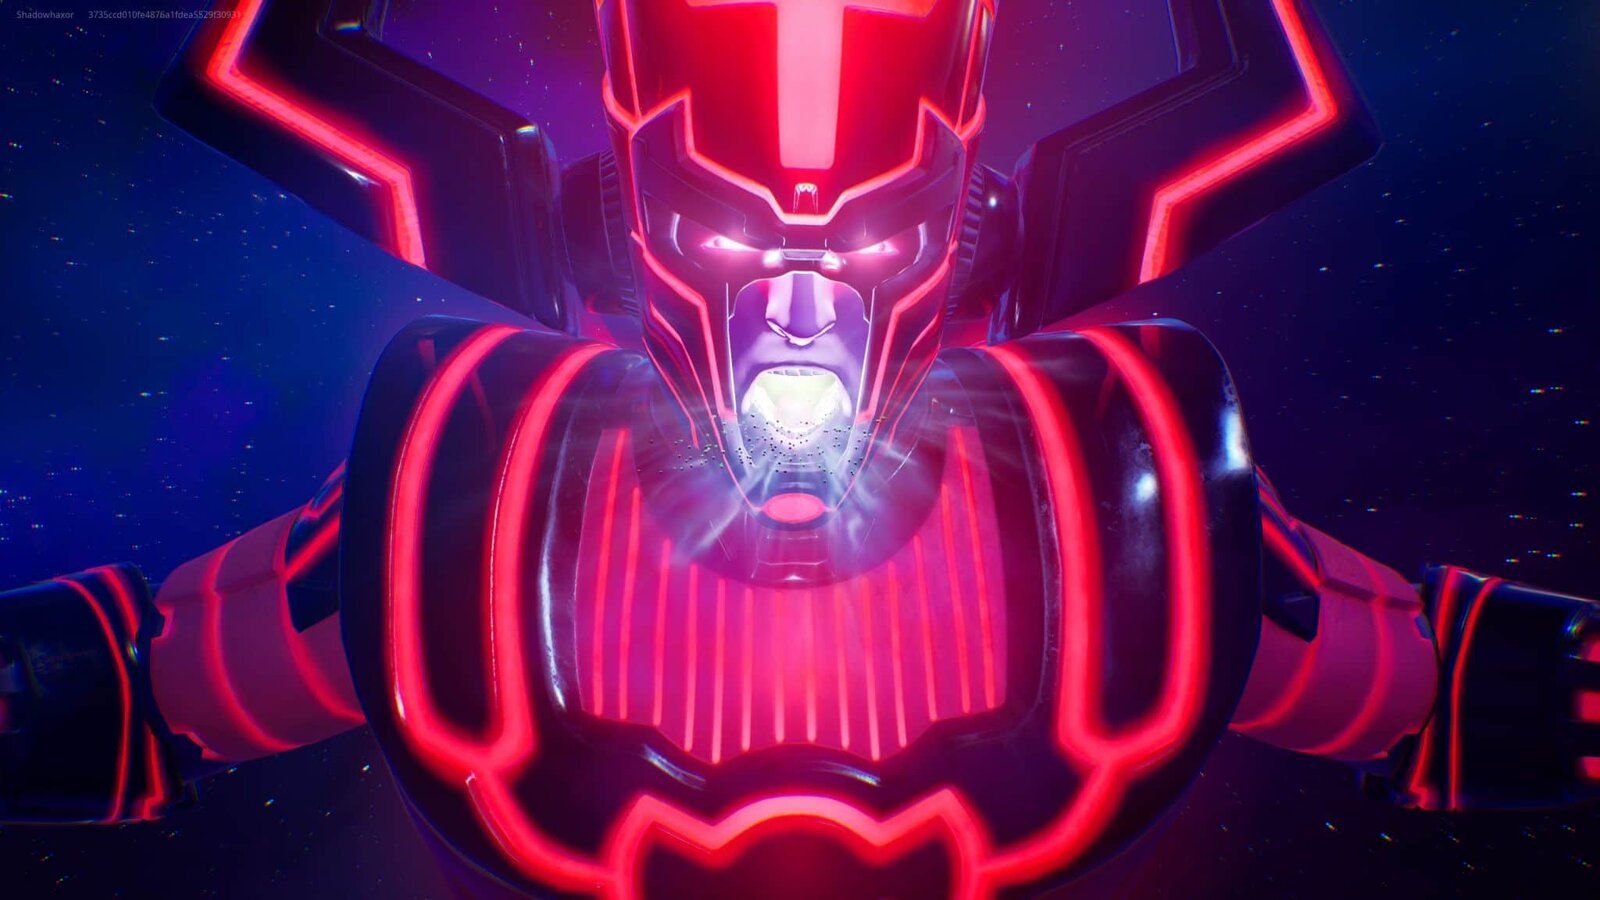 Fortnite's Season Ending In Game Event Featuring Galactus Went Out With A Bang